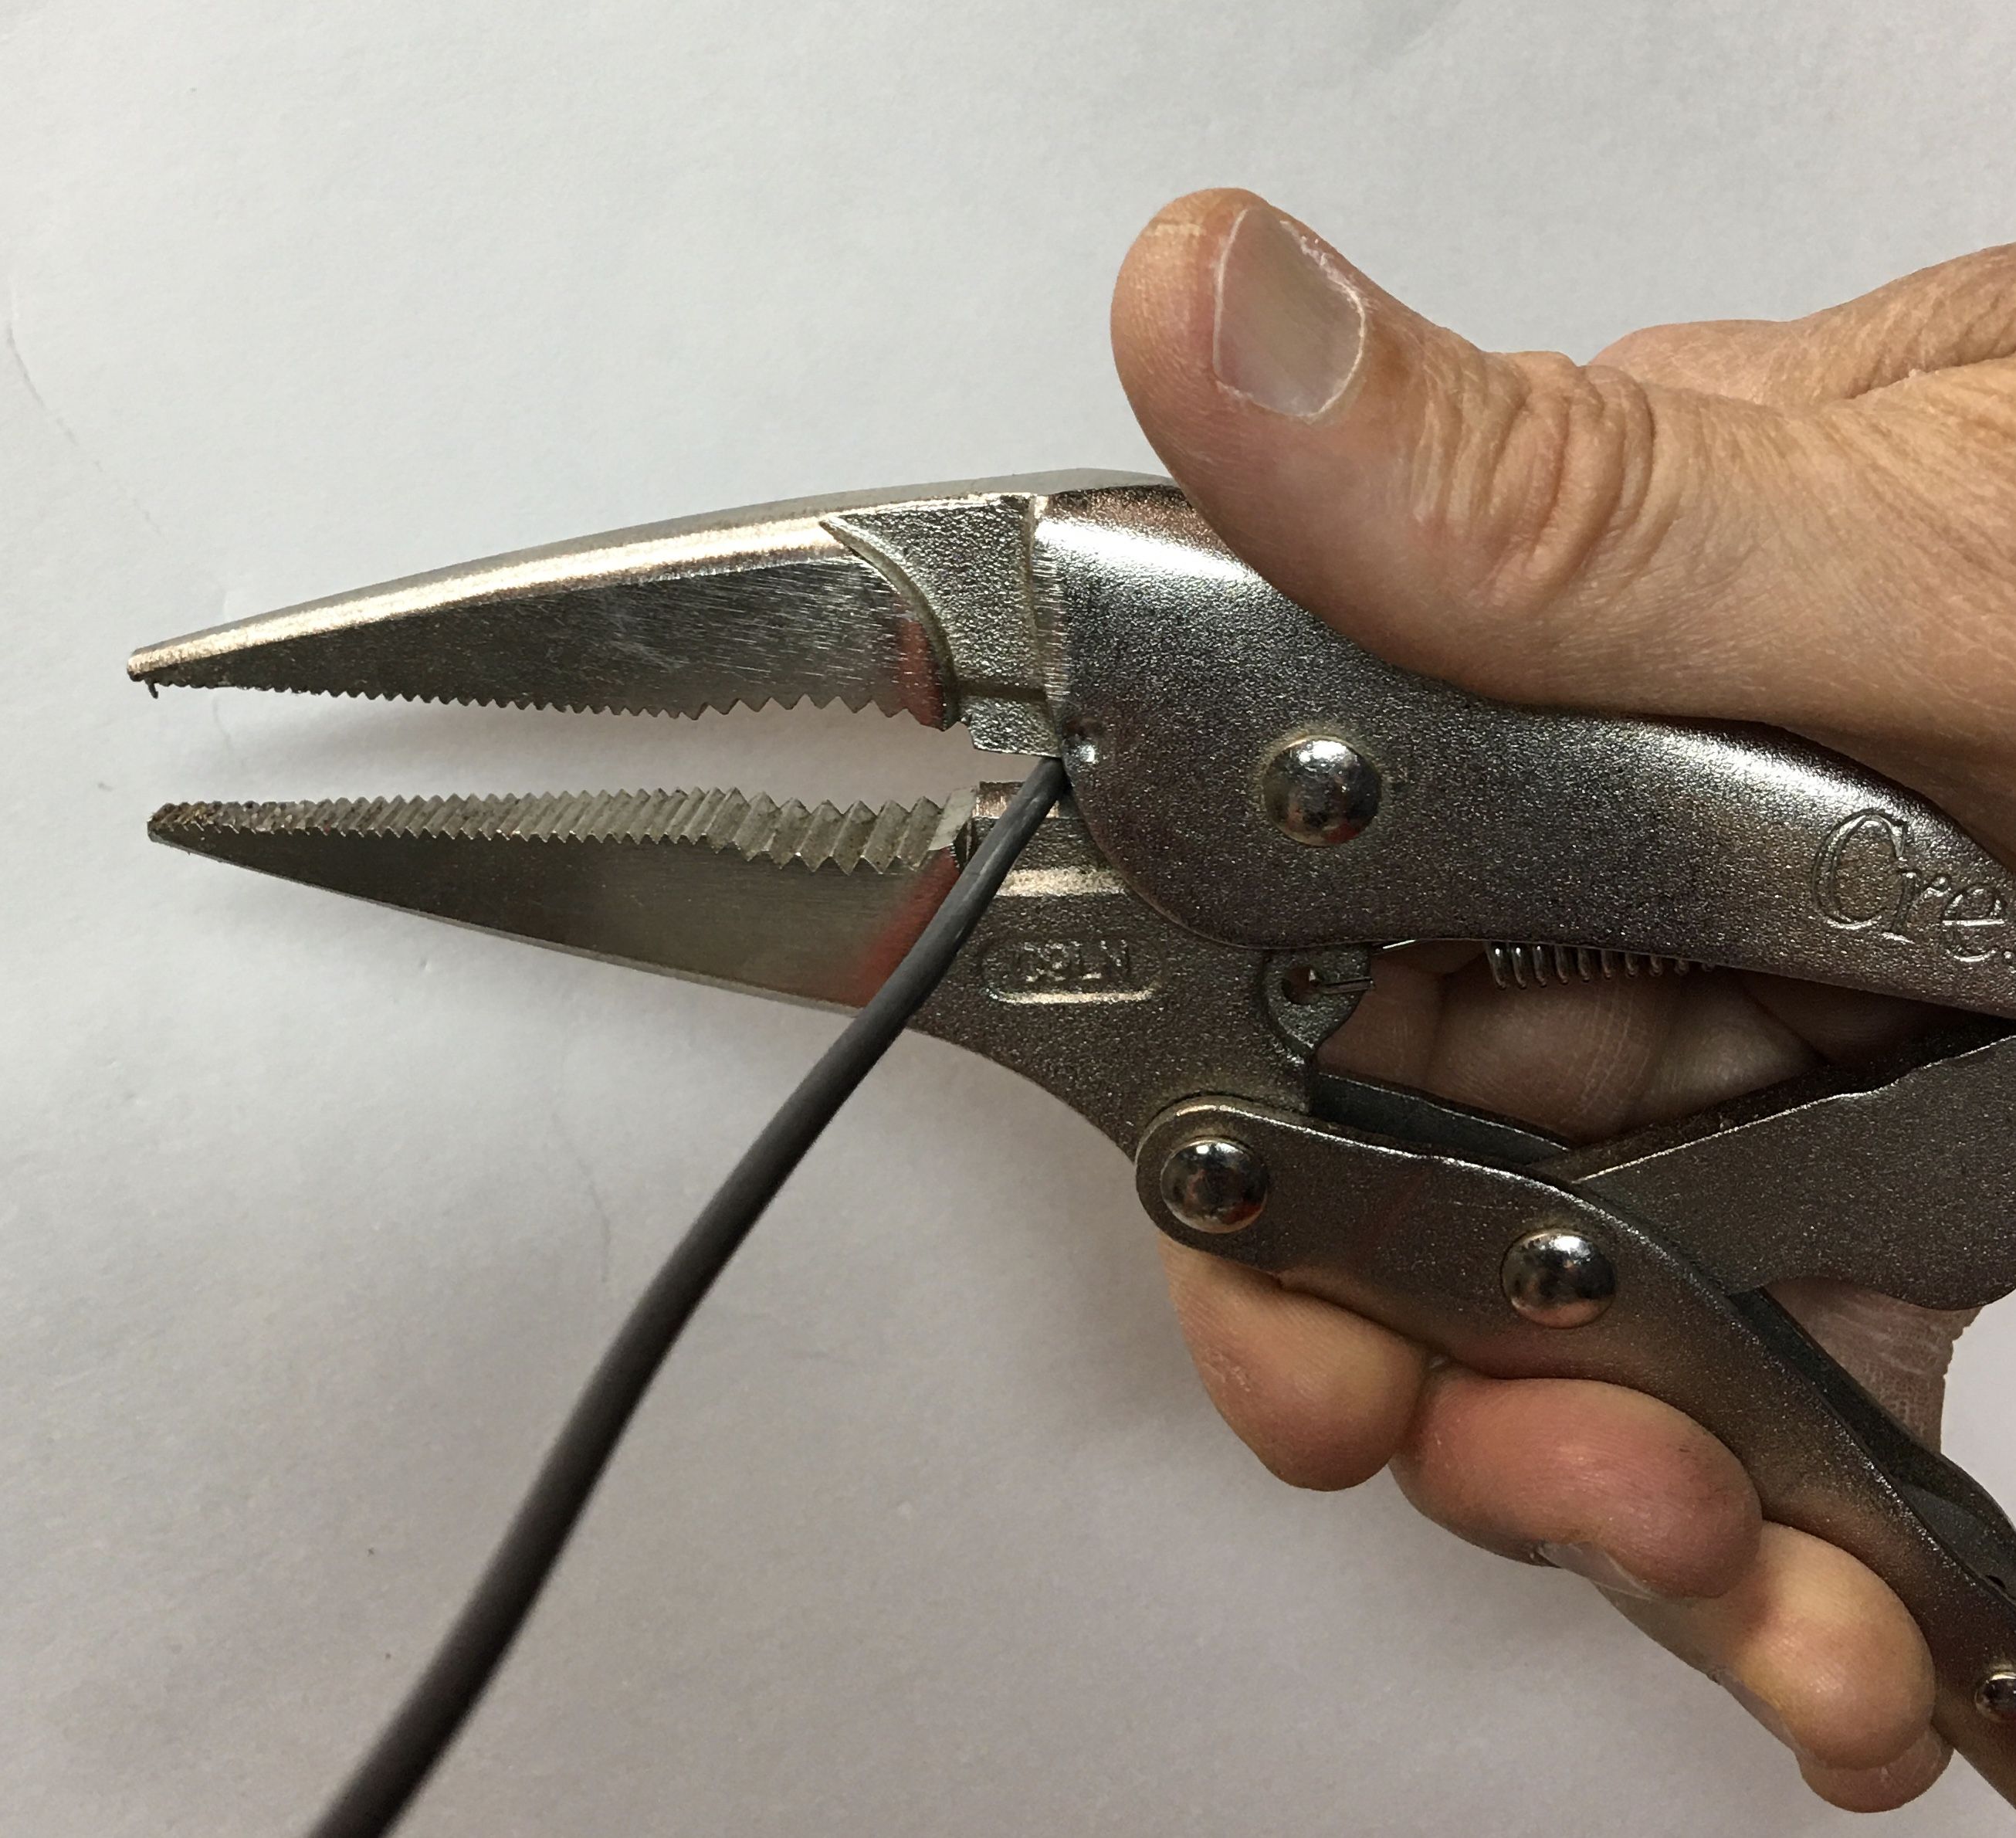 vise grips and needle-nose vice grips